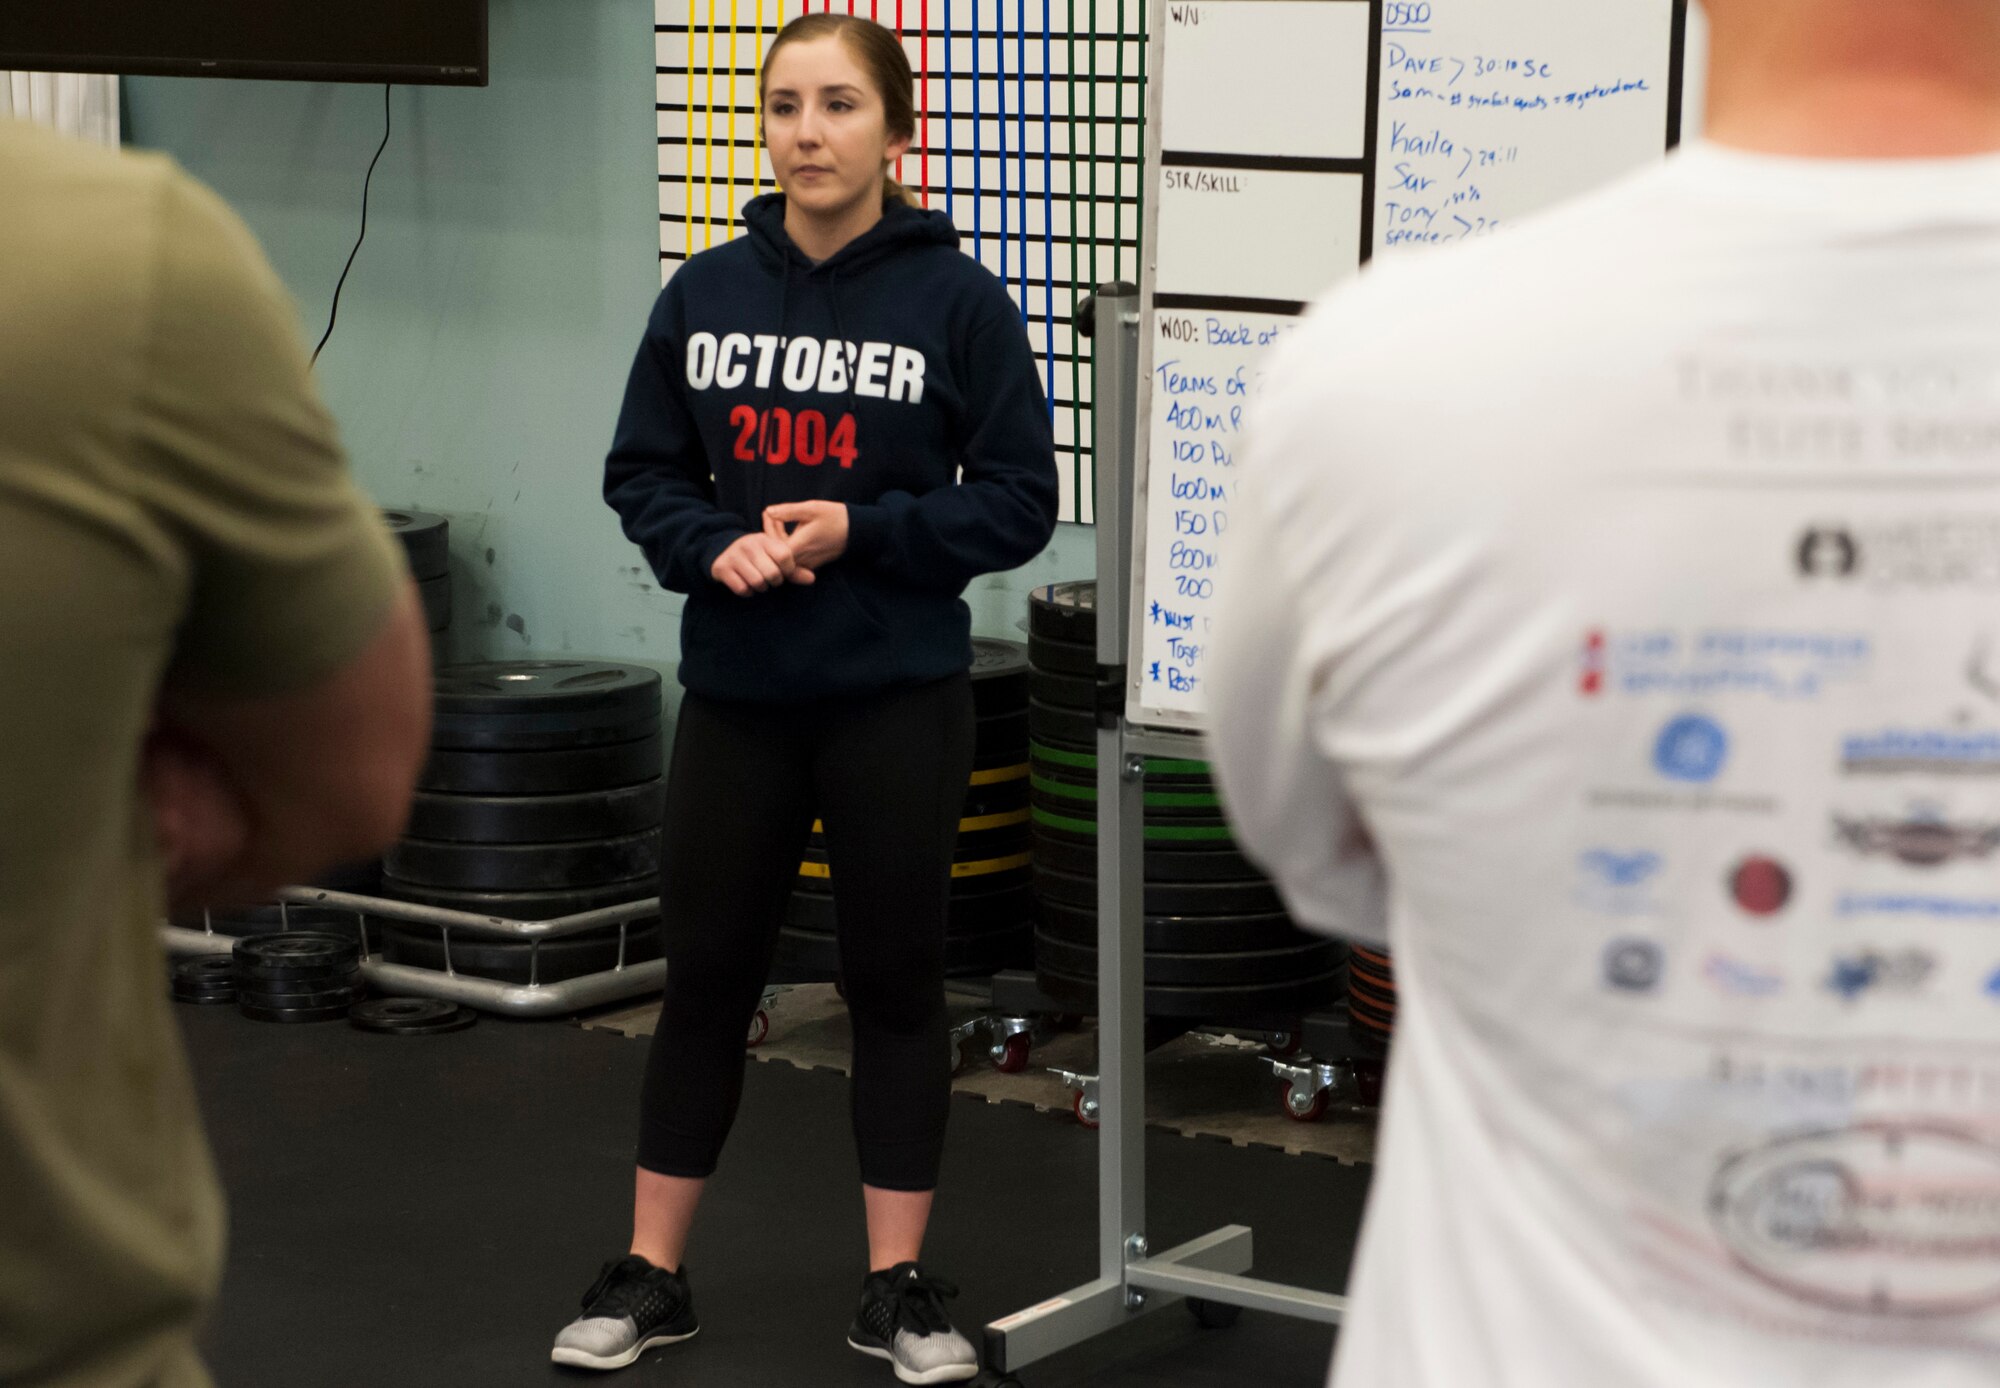 Airman First Class Amanda Blair, 341st Force Support Squadron missile chef gives instructions before the start of an exercise class April 29, 2019, at Malmstrom Air Force Base, Mont.